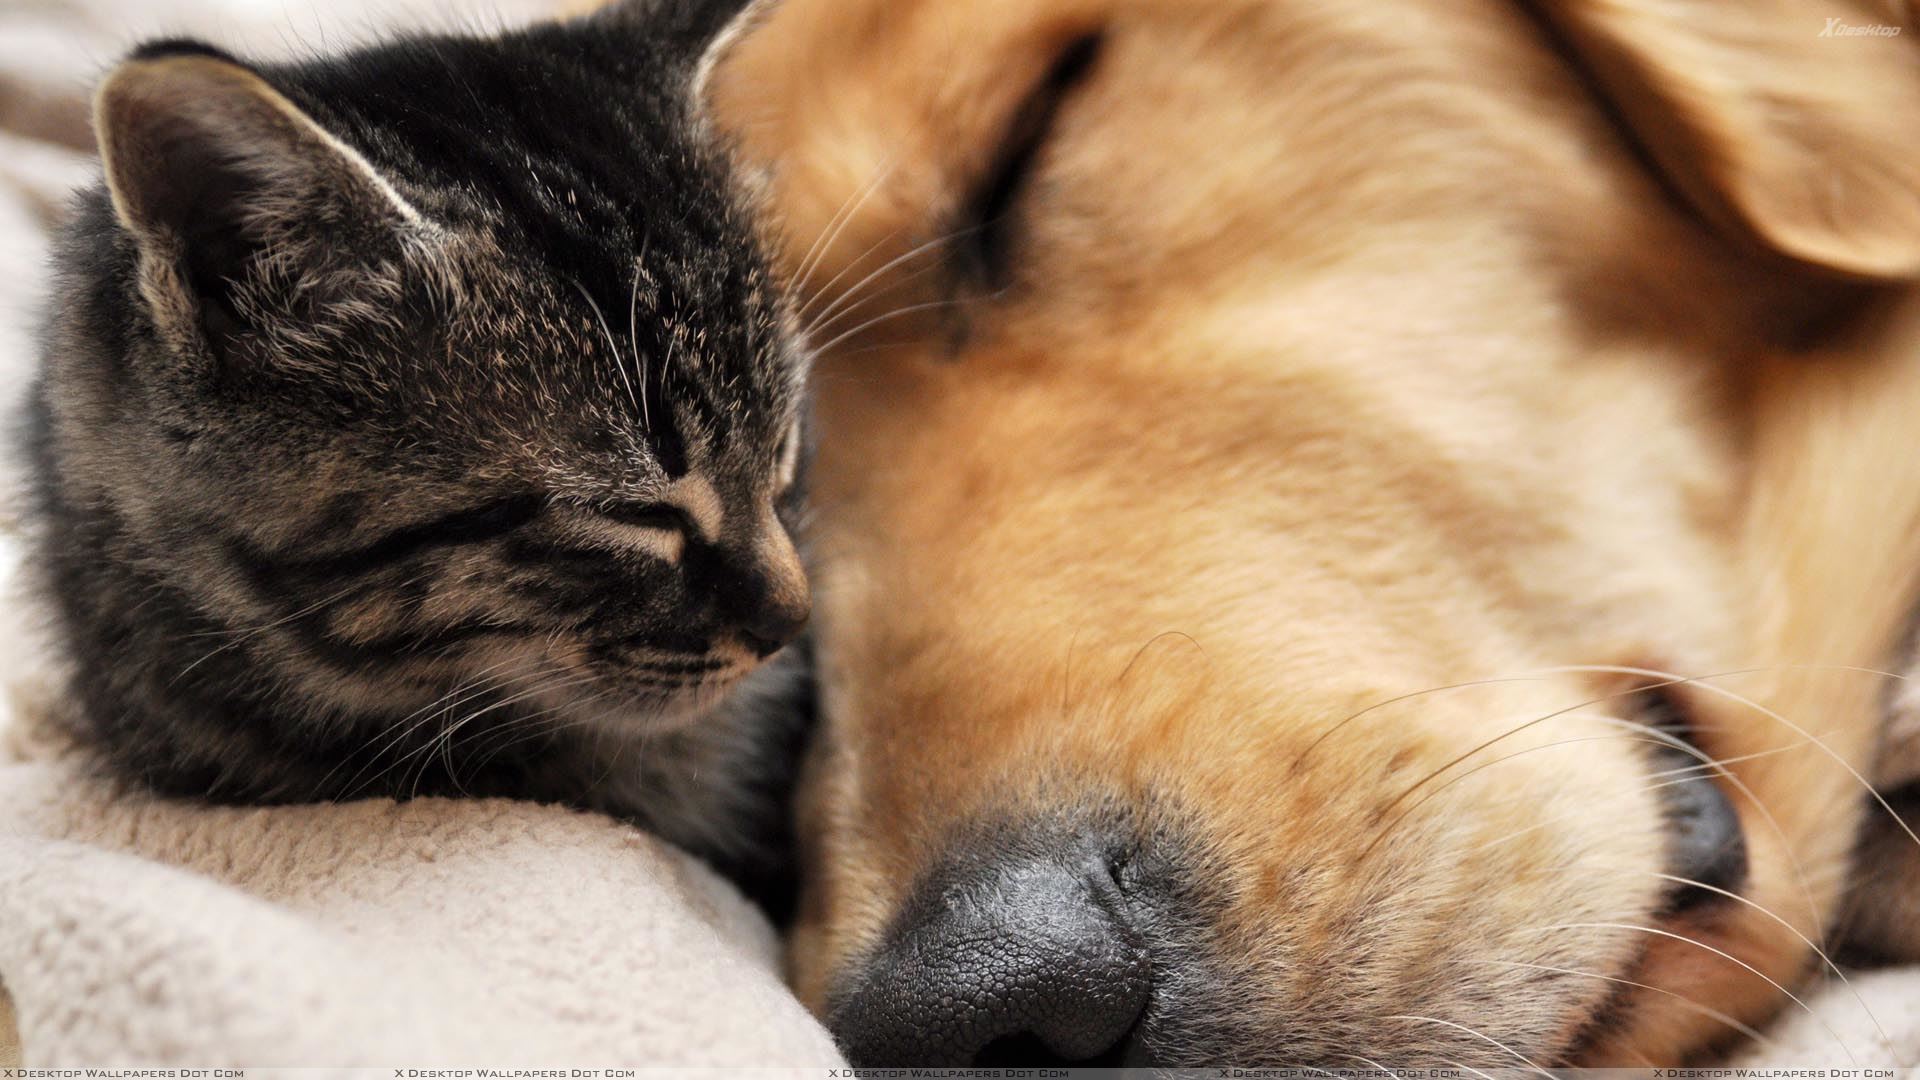 This Is Love Dog Sleeping With Cat Wallpaper